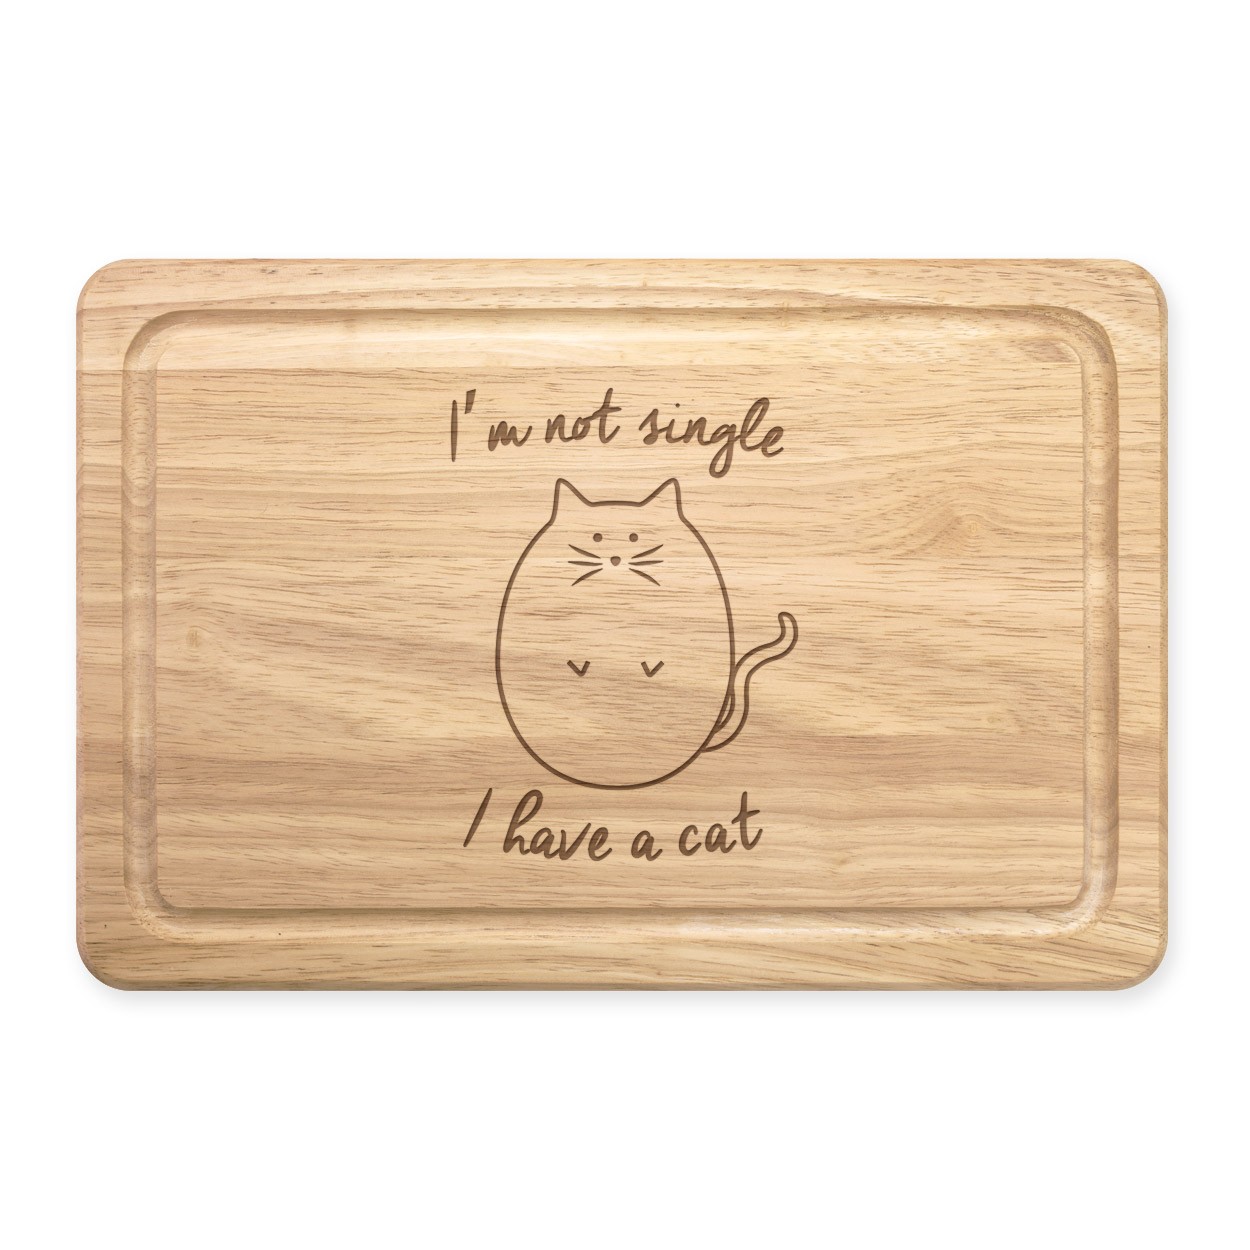 I'm Not Single I Have A Cat Rectangular Wooden Chopping Board